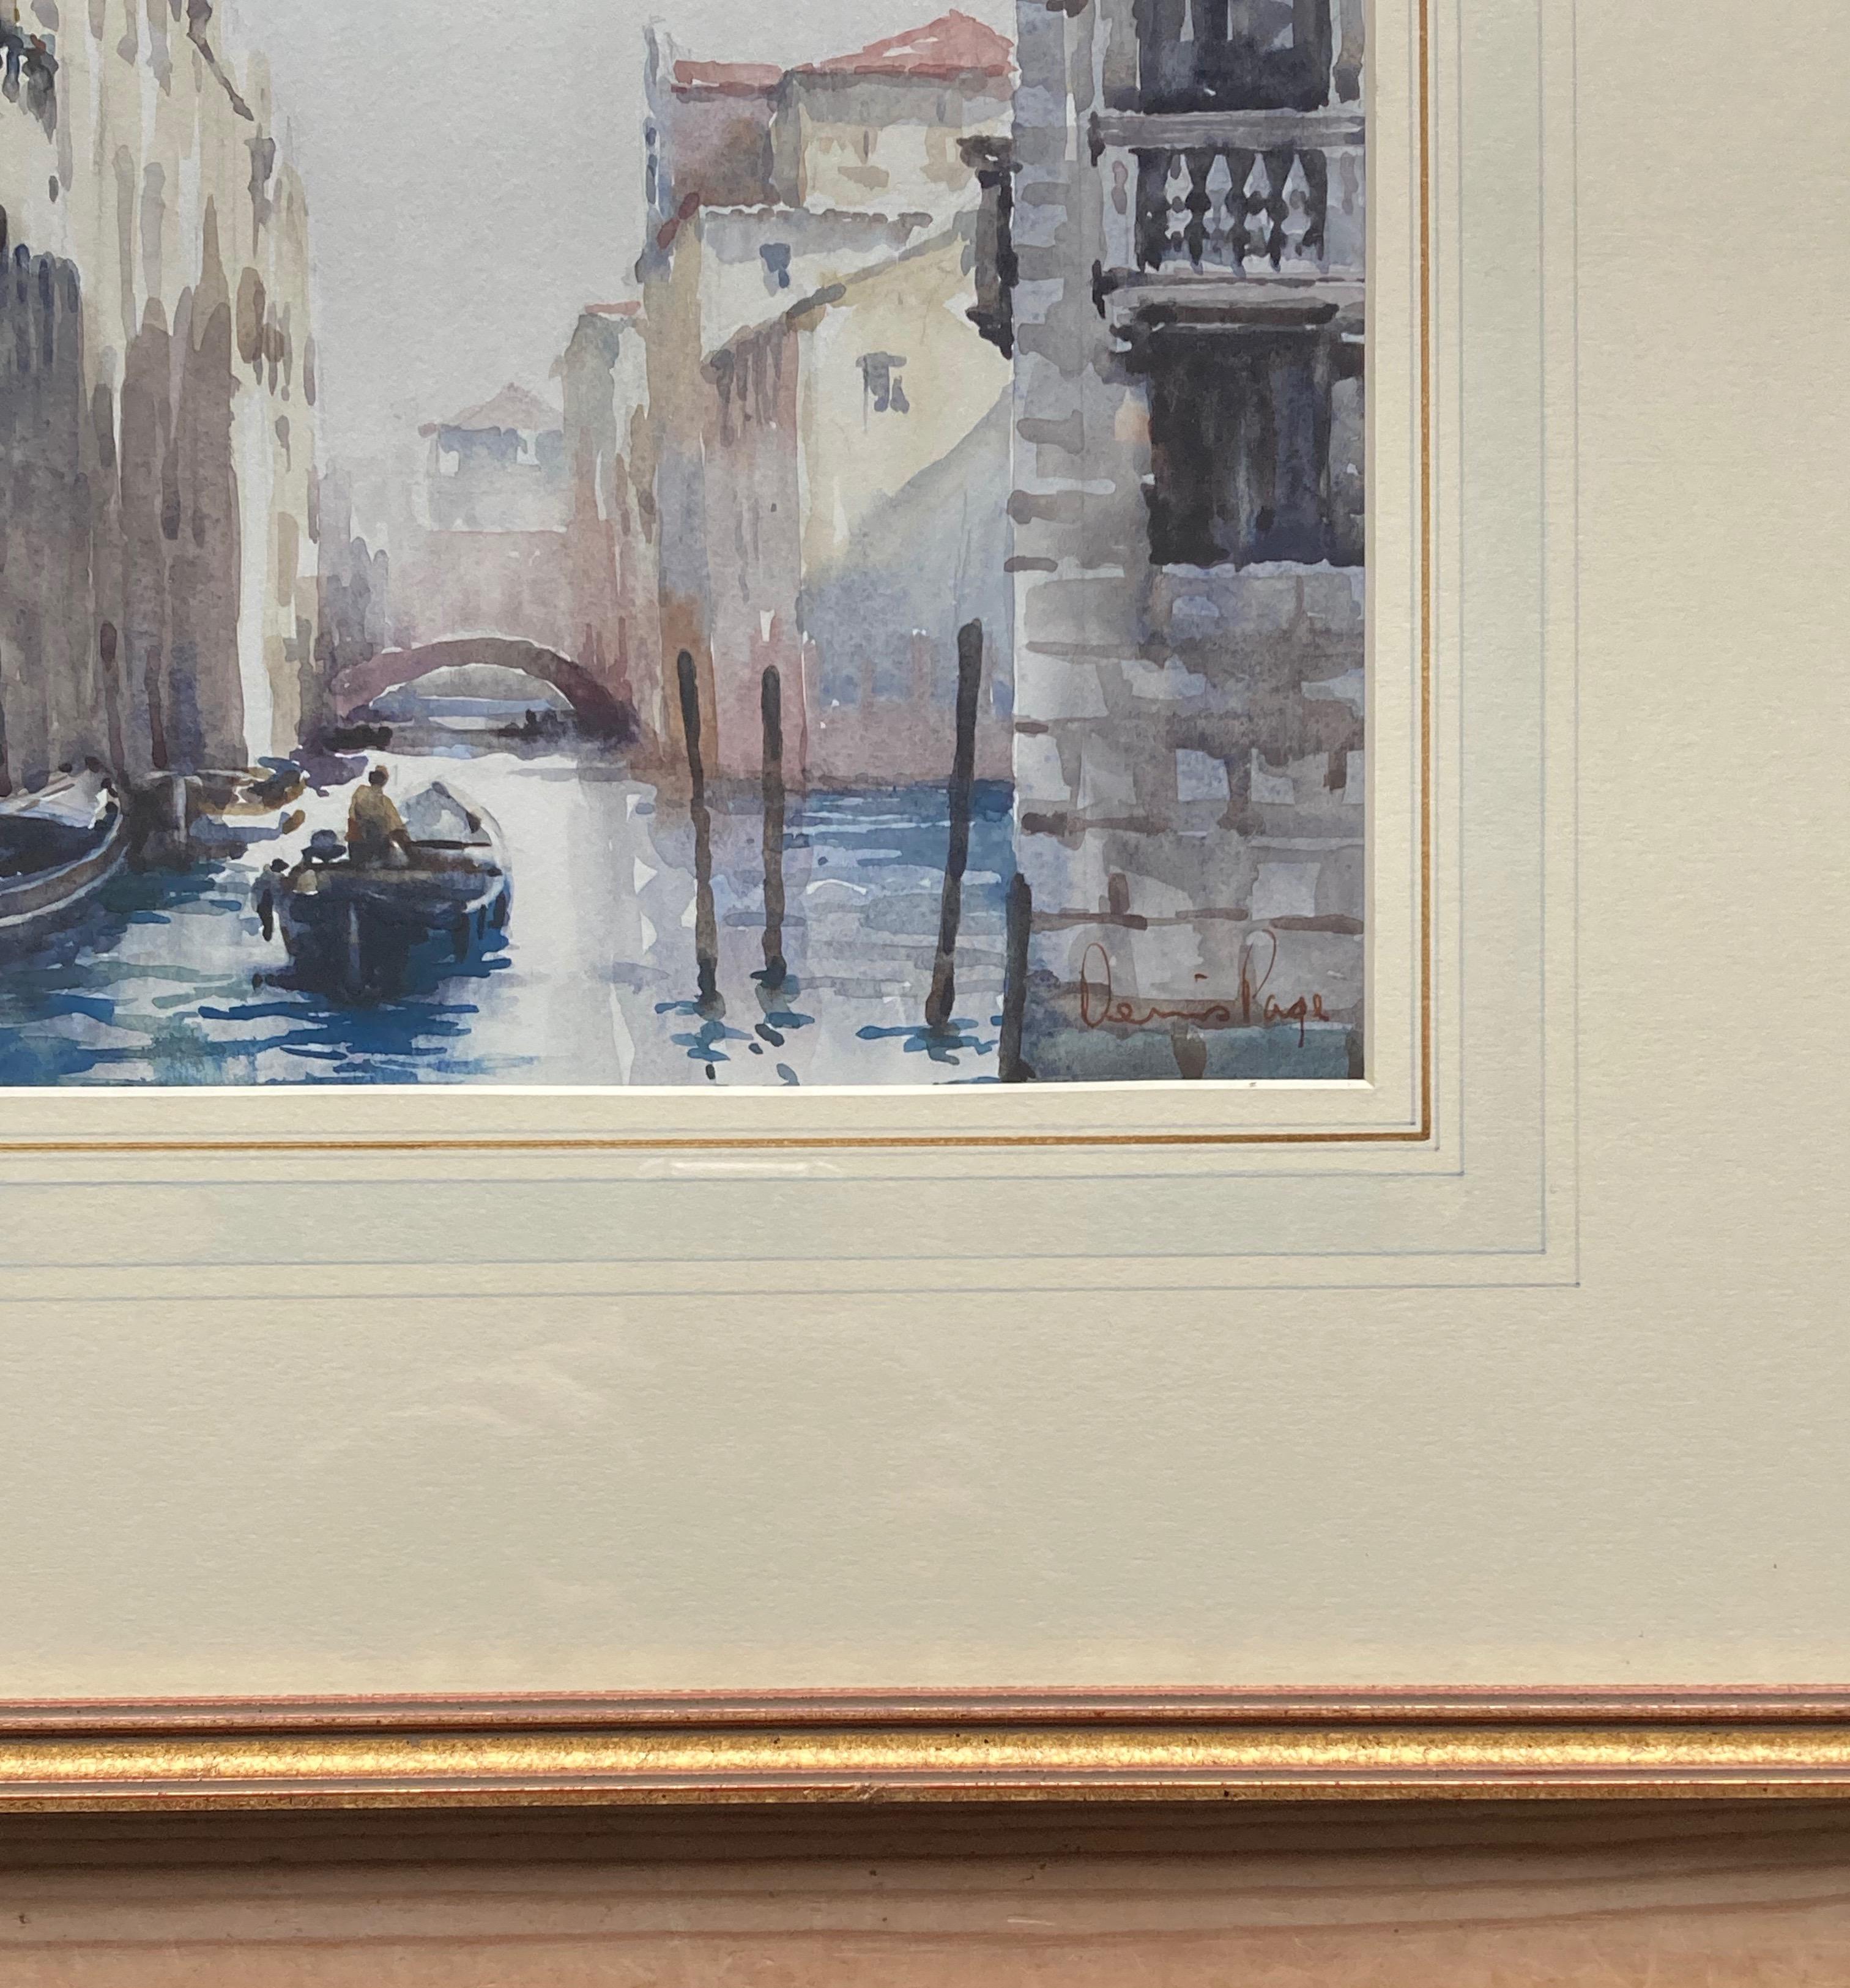 A very atmospheric watercolour capturing the light and shimmer of a Venetian canal. One of two views of Venice by the artist that I am offering  - please see my other listing.

Dennis Page (born 1926)
Venice Balcony
Signed
Watercolour
8½ x 12 inches